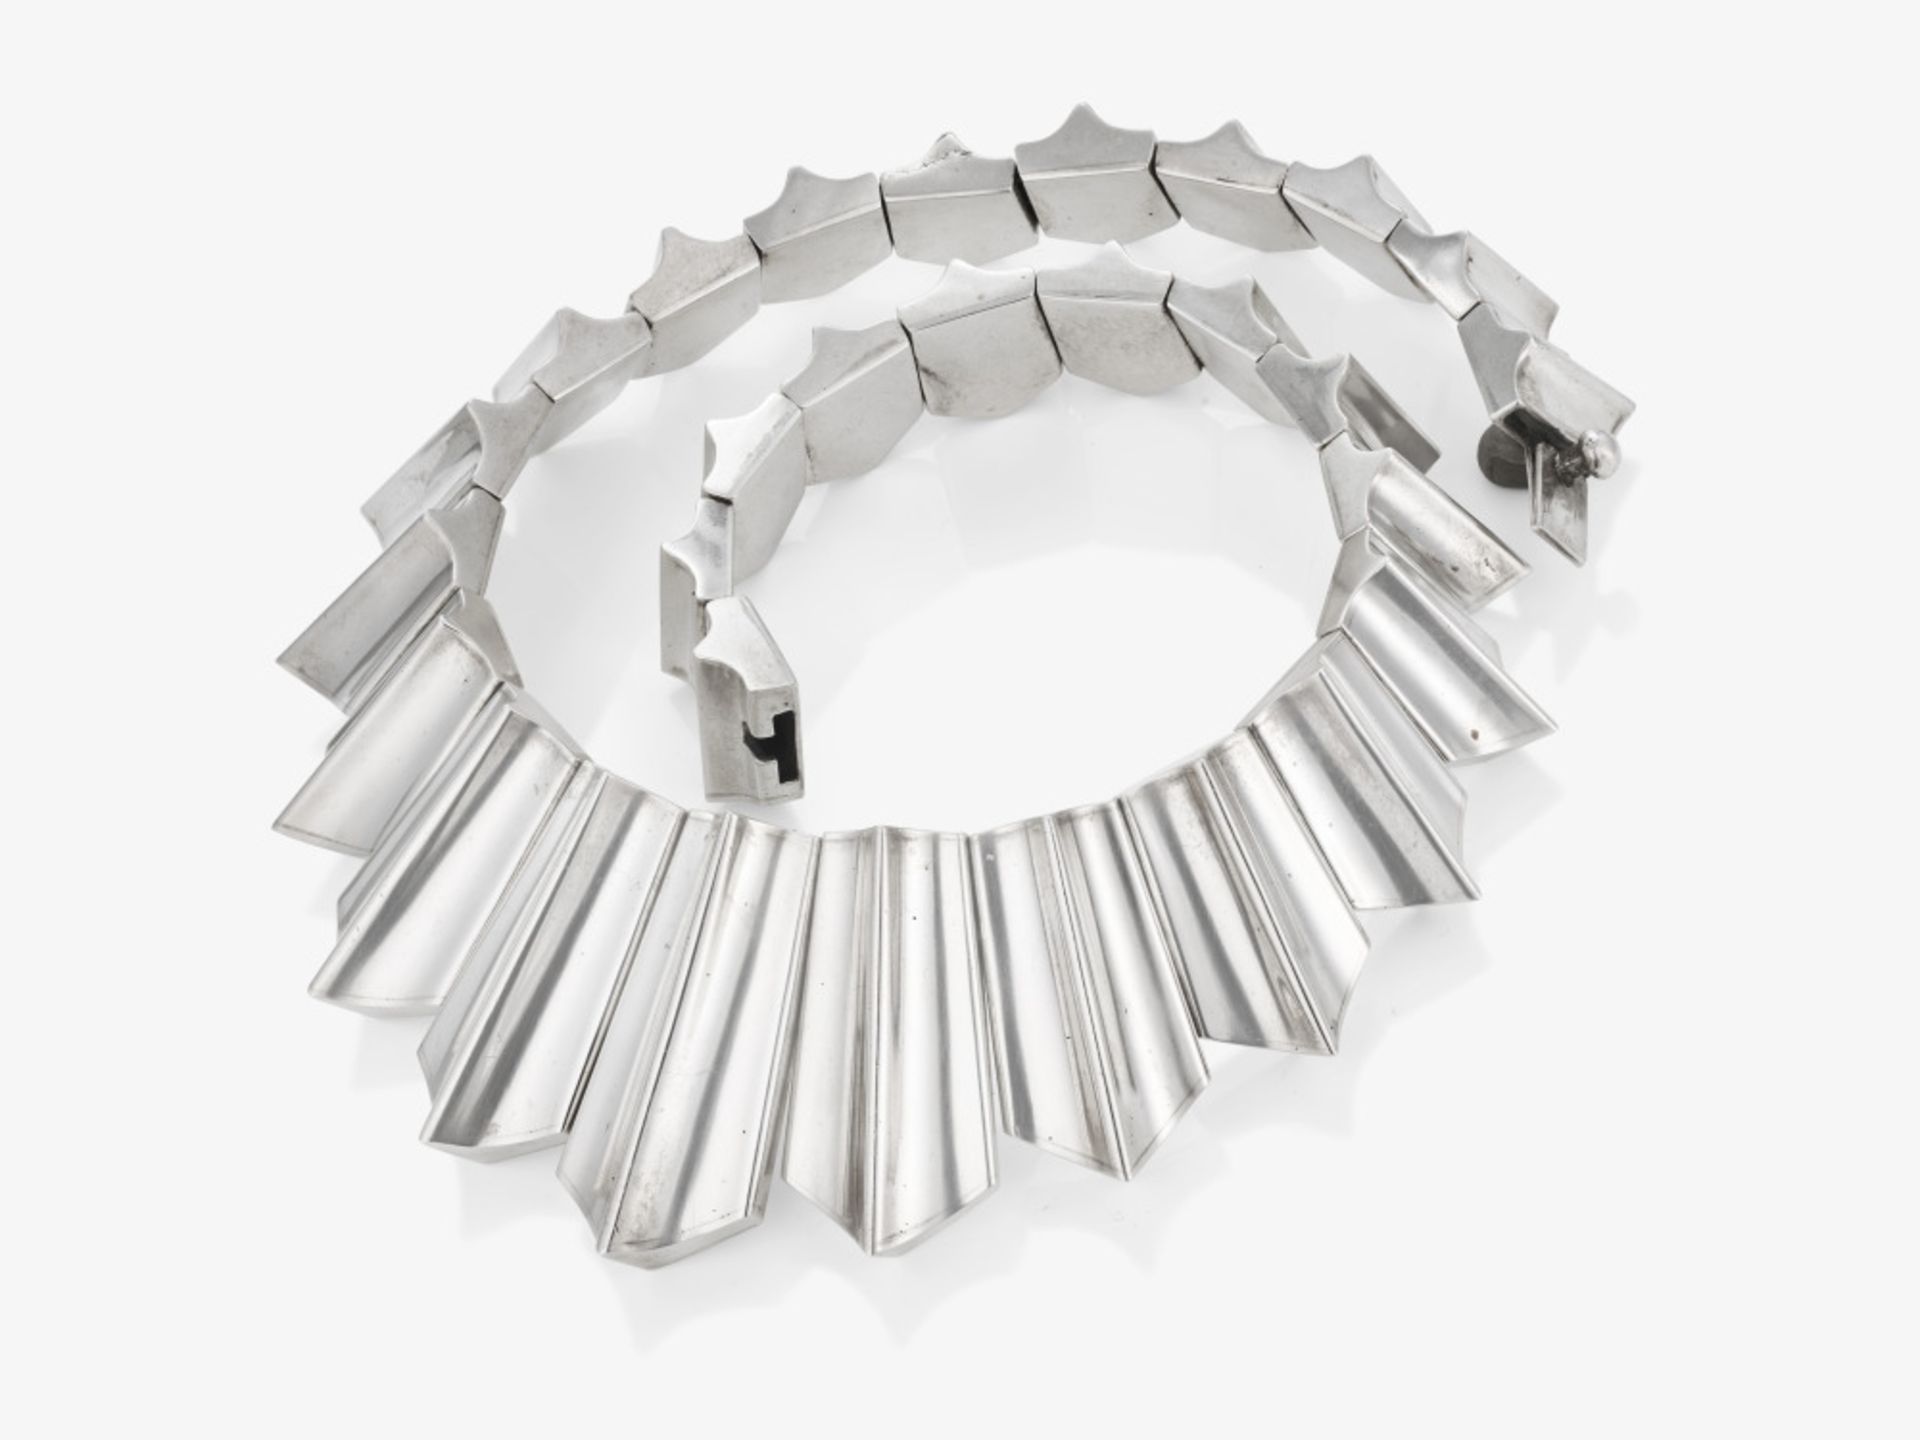 A Vintage choker necklace made of geometric, high-gloss silver - Mexico, Taxco, 1960s - 1970s - Image 2 of 2